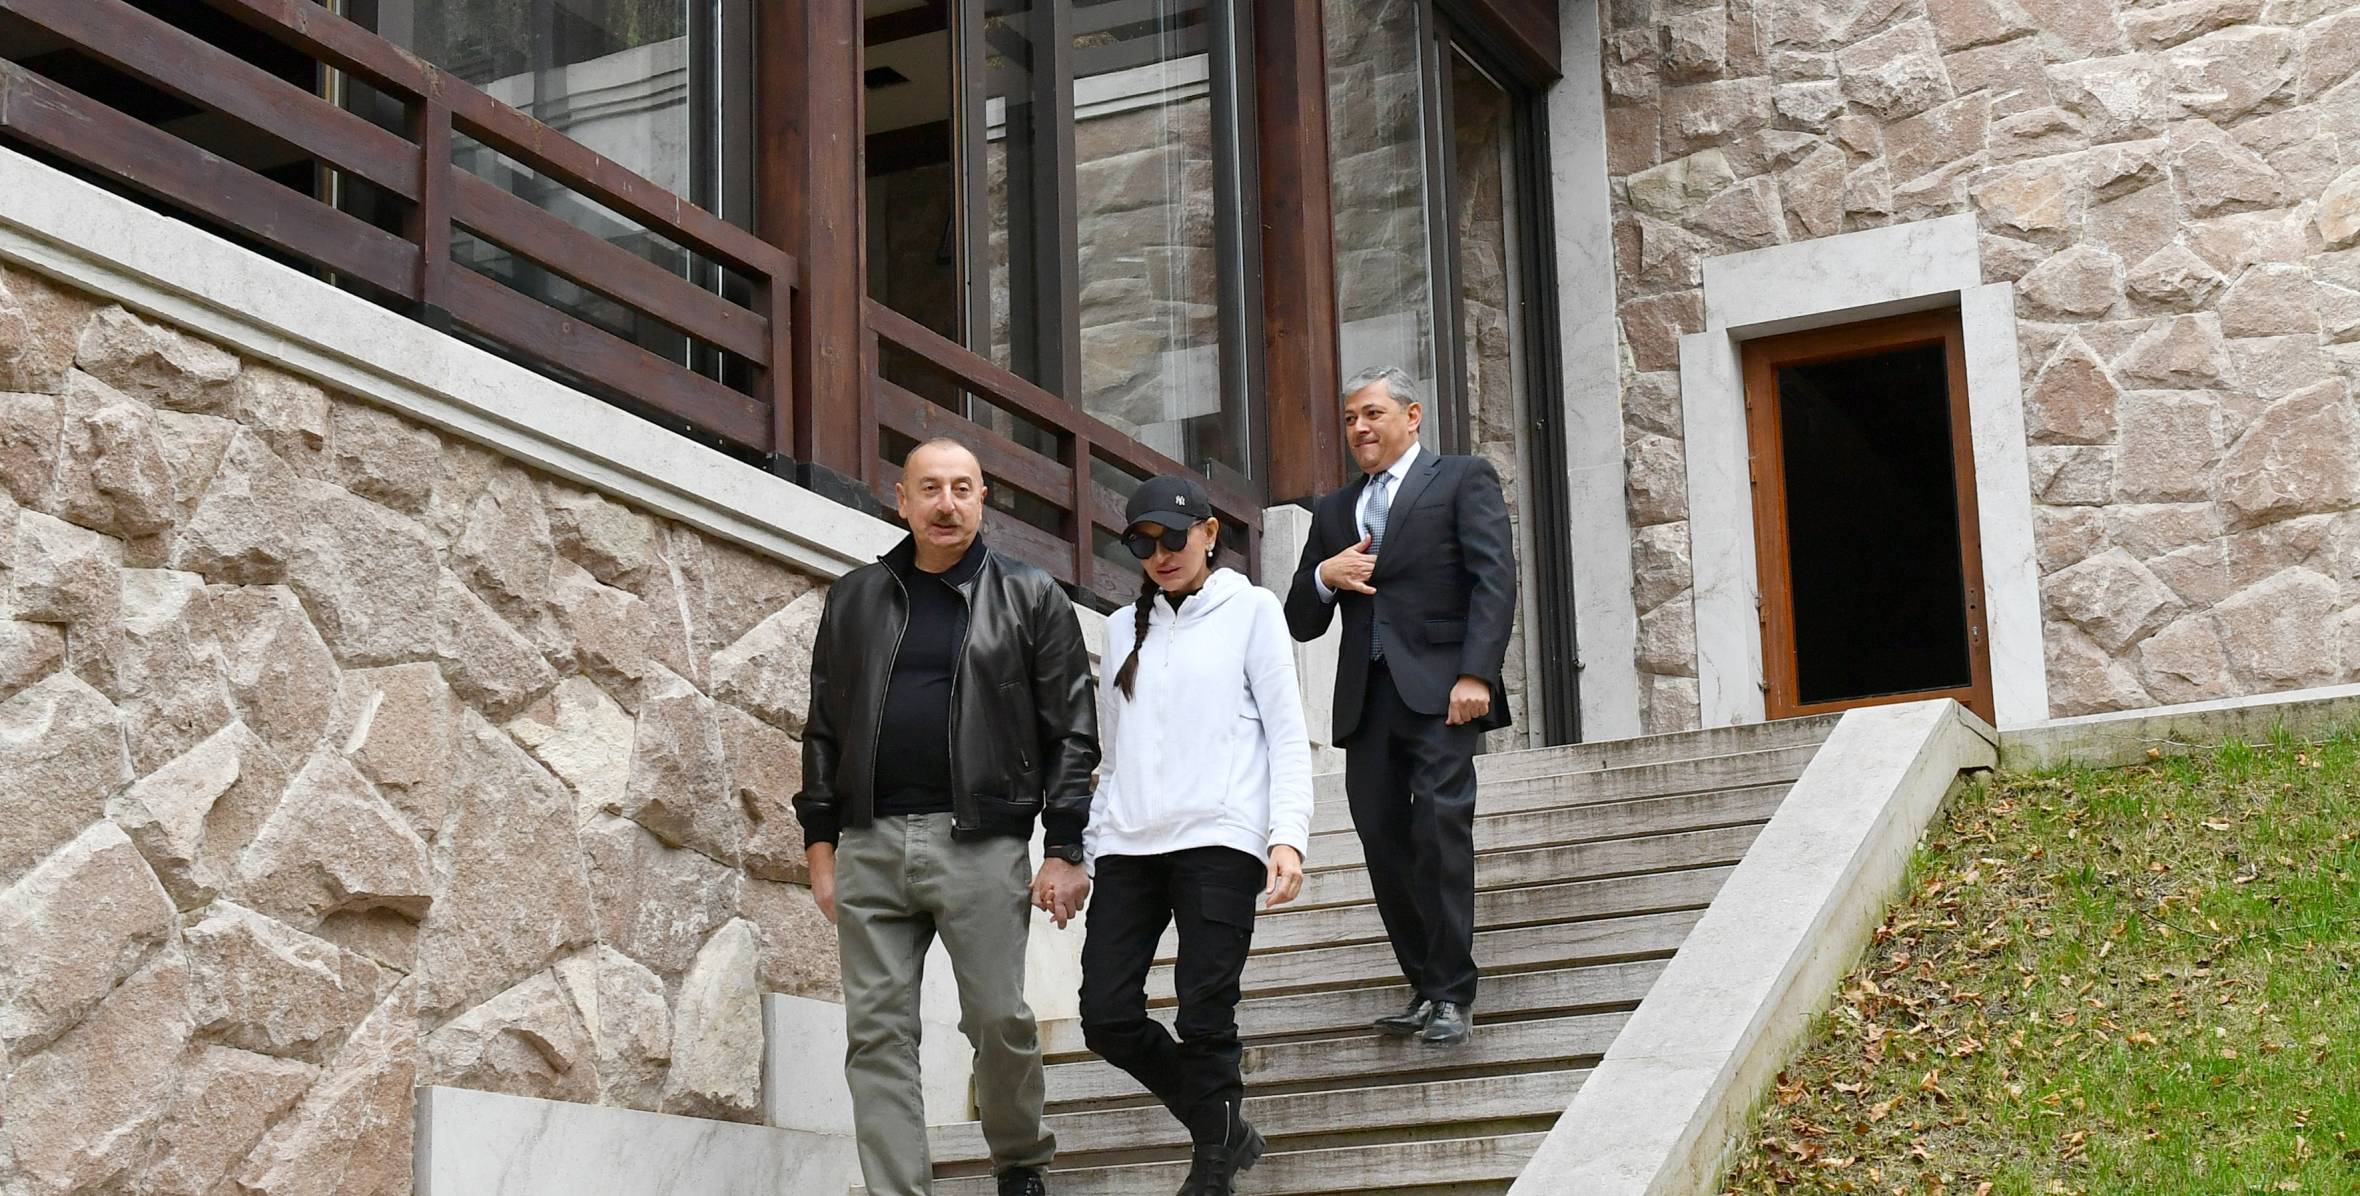 Ilham Aliyev and First Lady Mehriban Aliyeva have visited the Isa Spring in Shusha